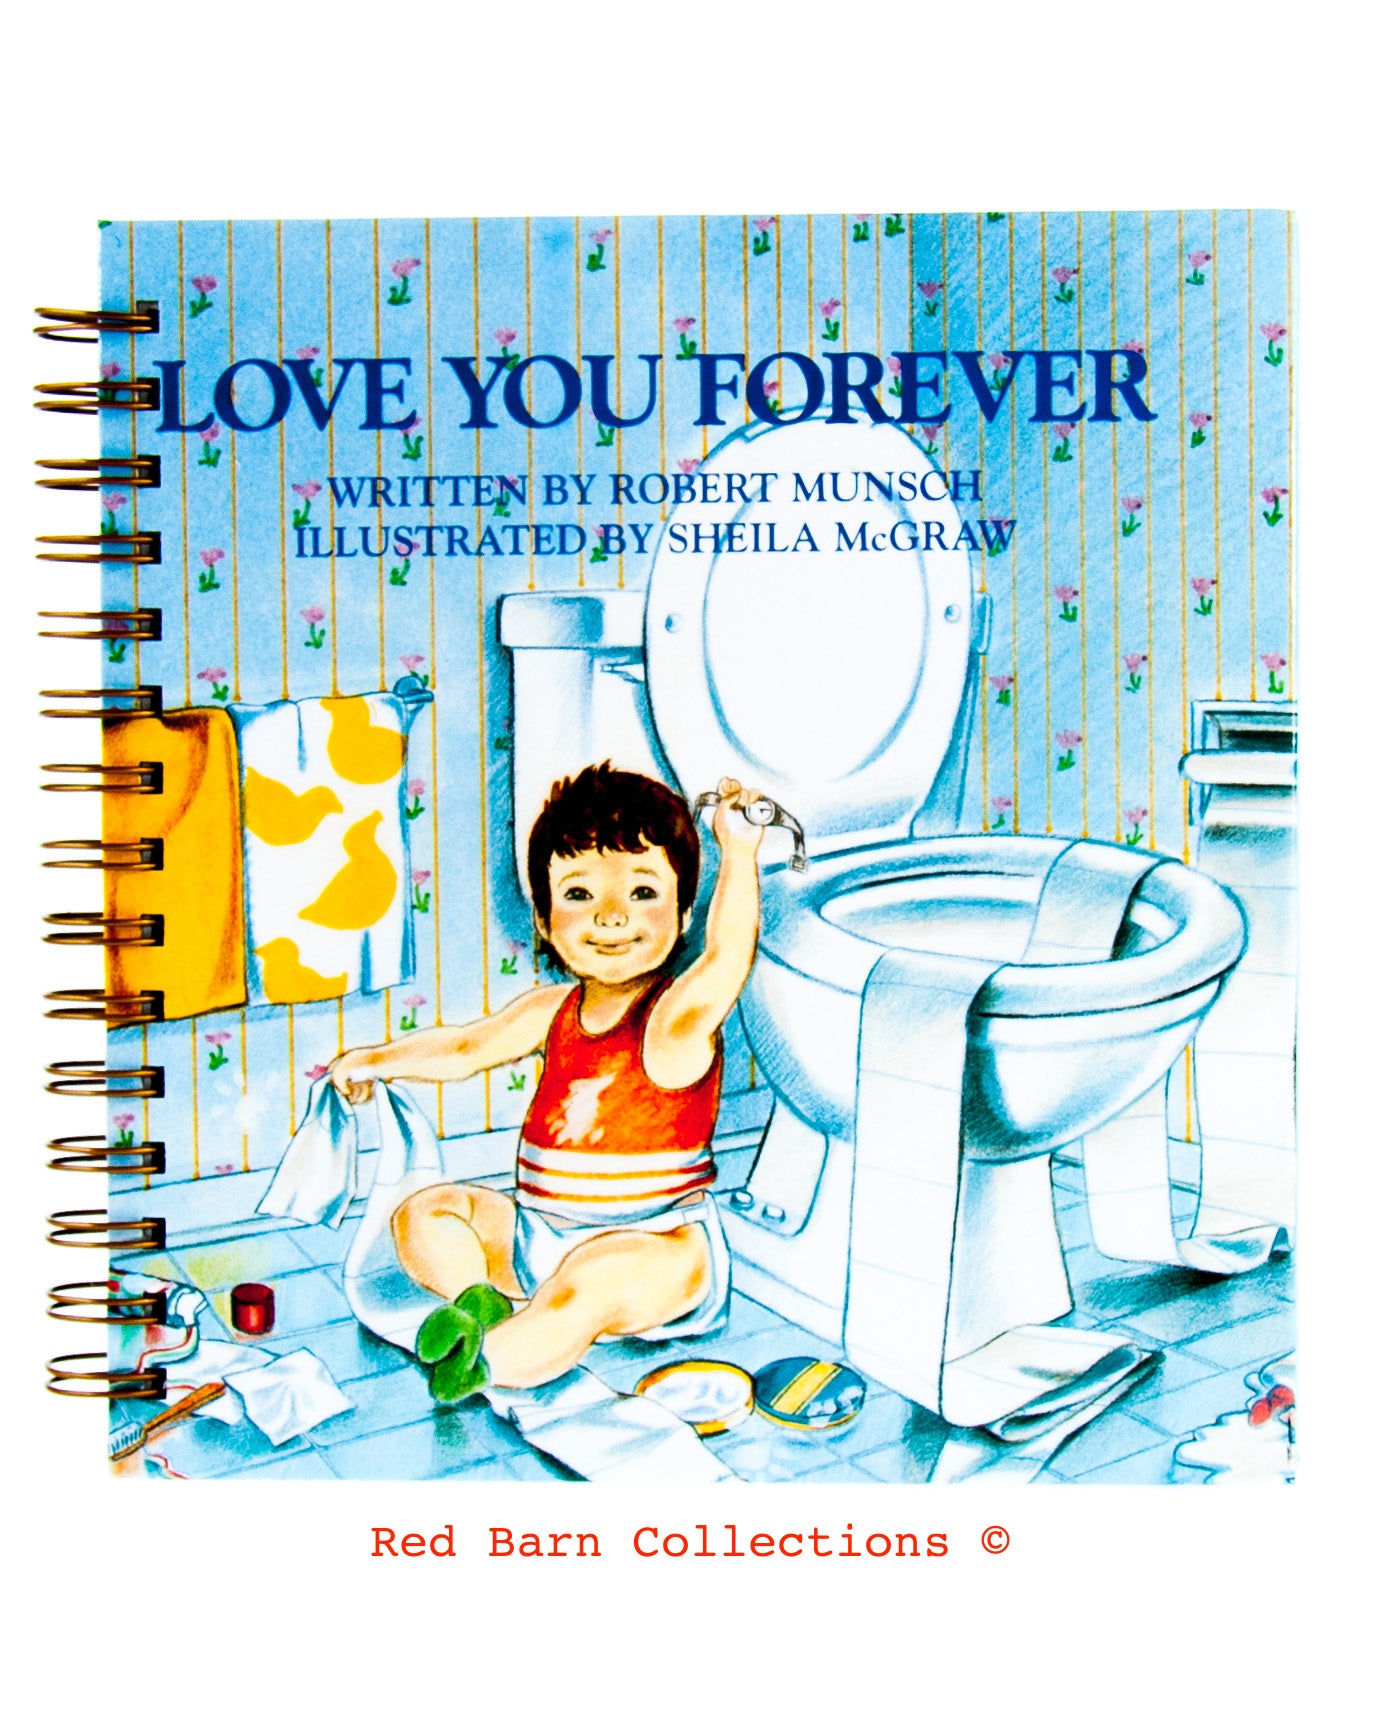 Love You Forever-Red Barn Collections